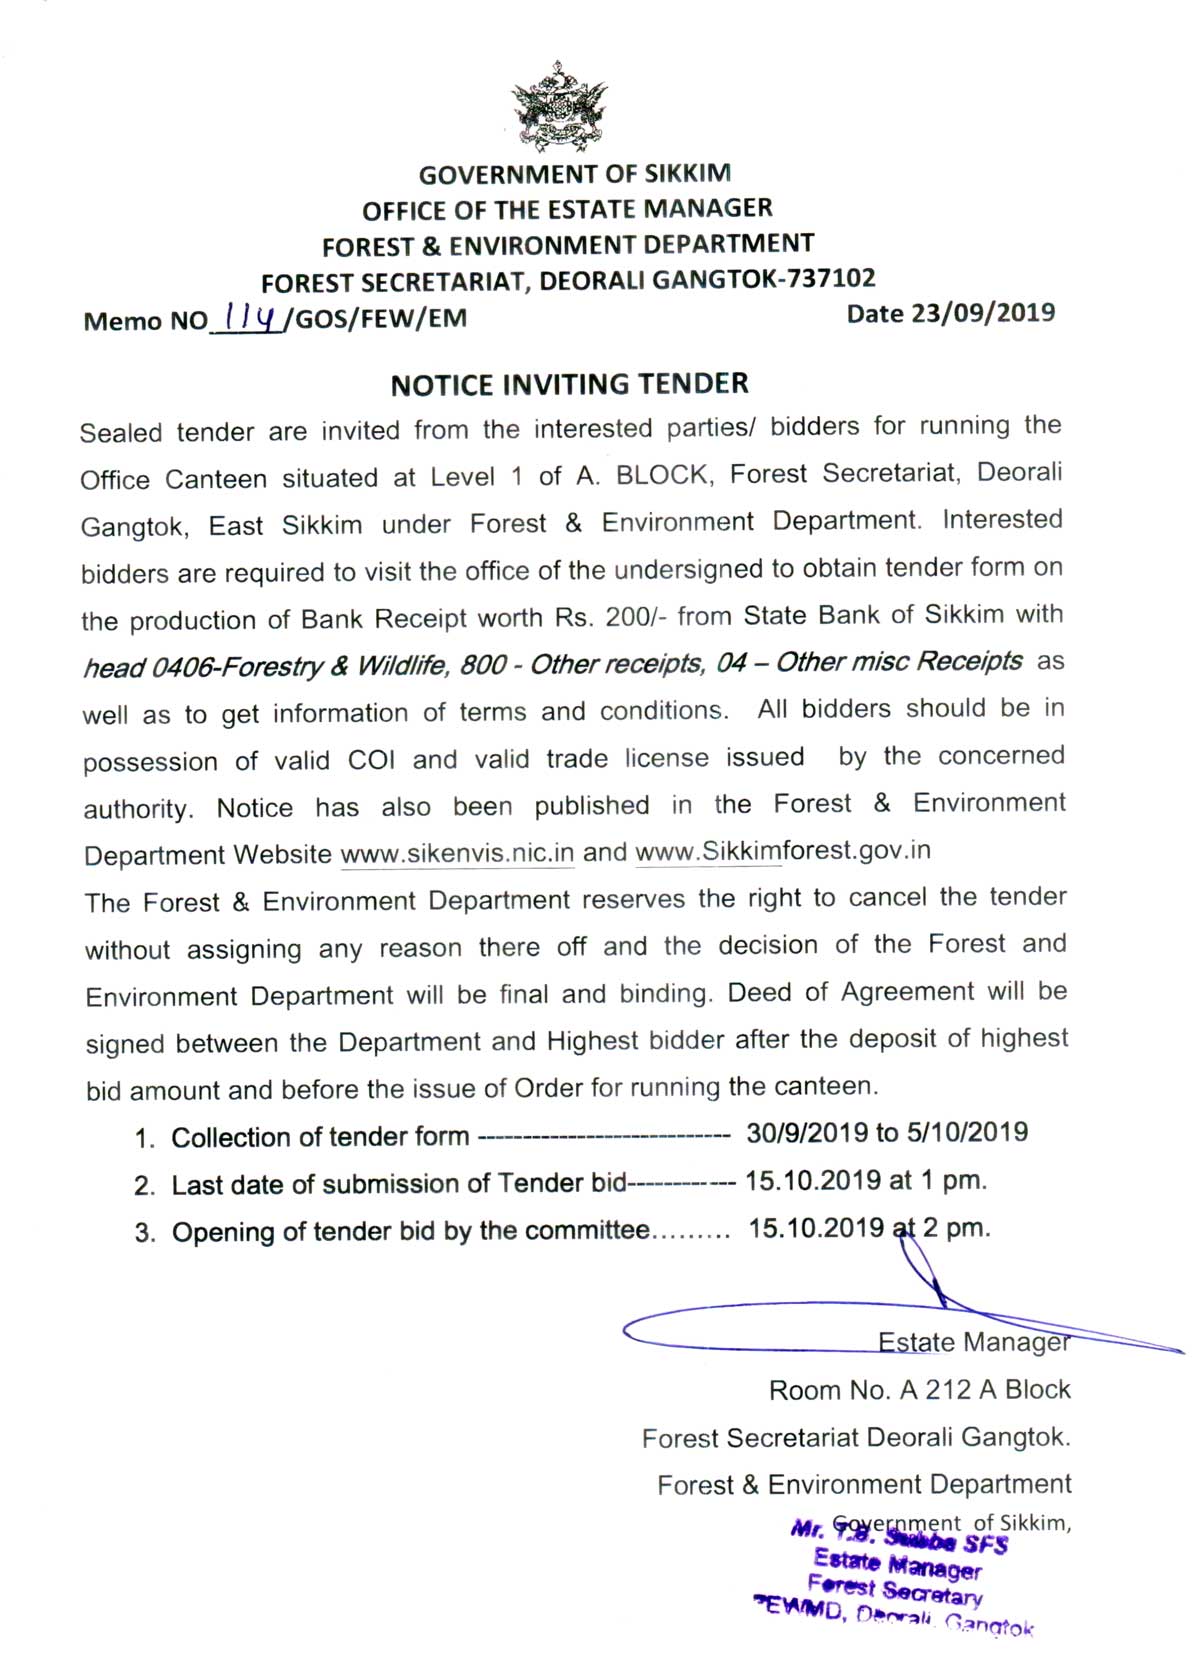 Tender Notice for Running the Office Canteen at Forest Secretariat A Block